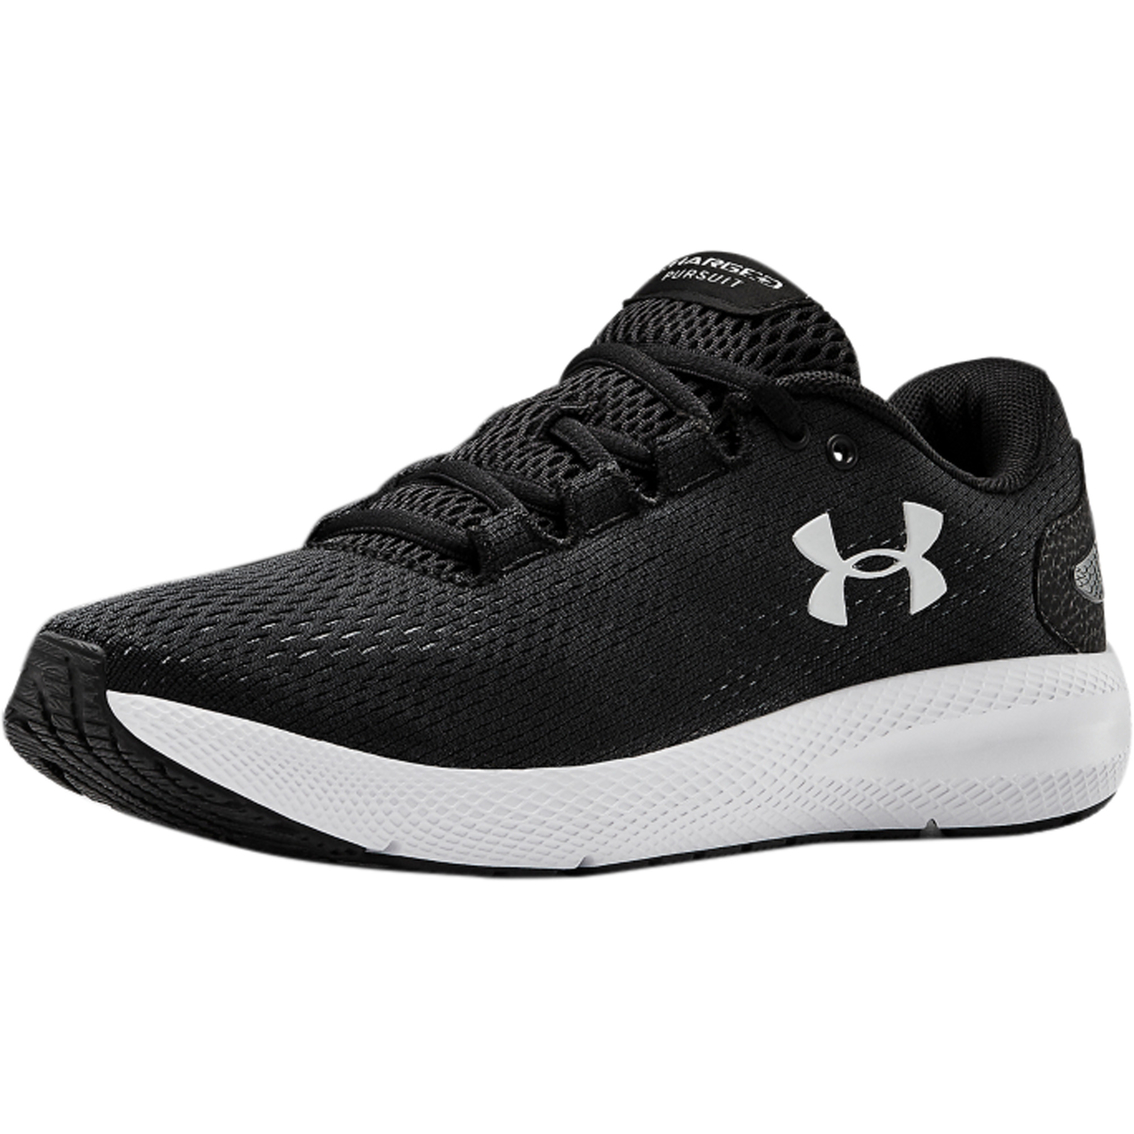 womens under armour shoes black